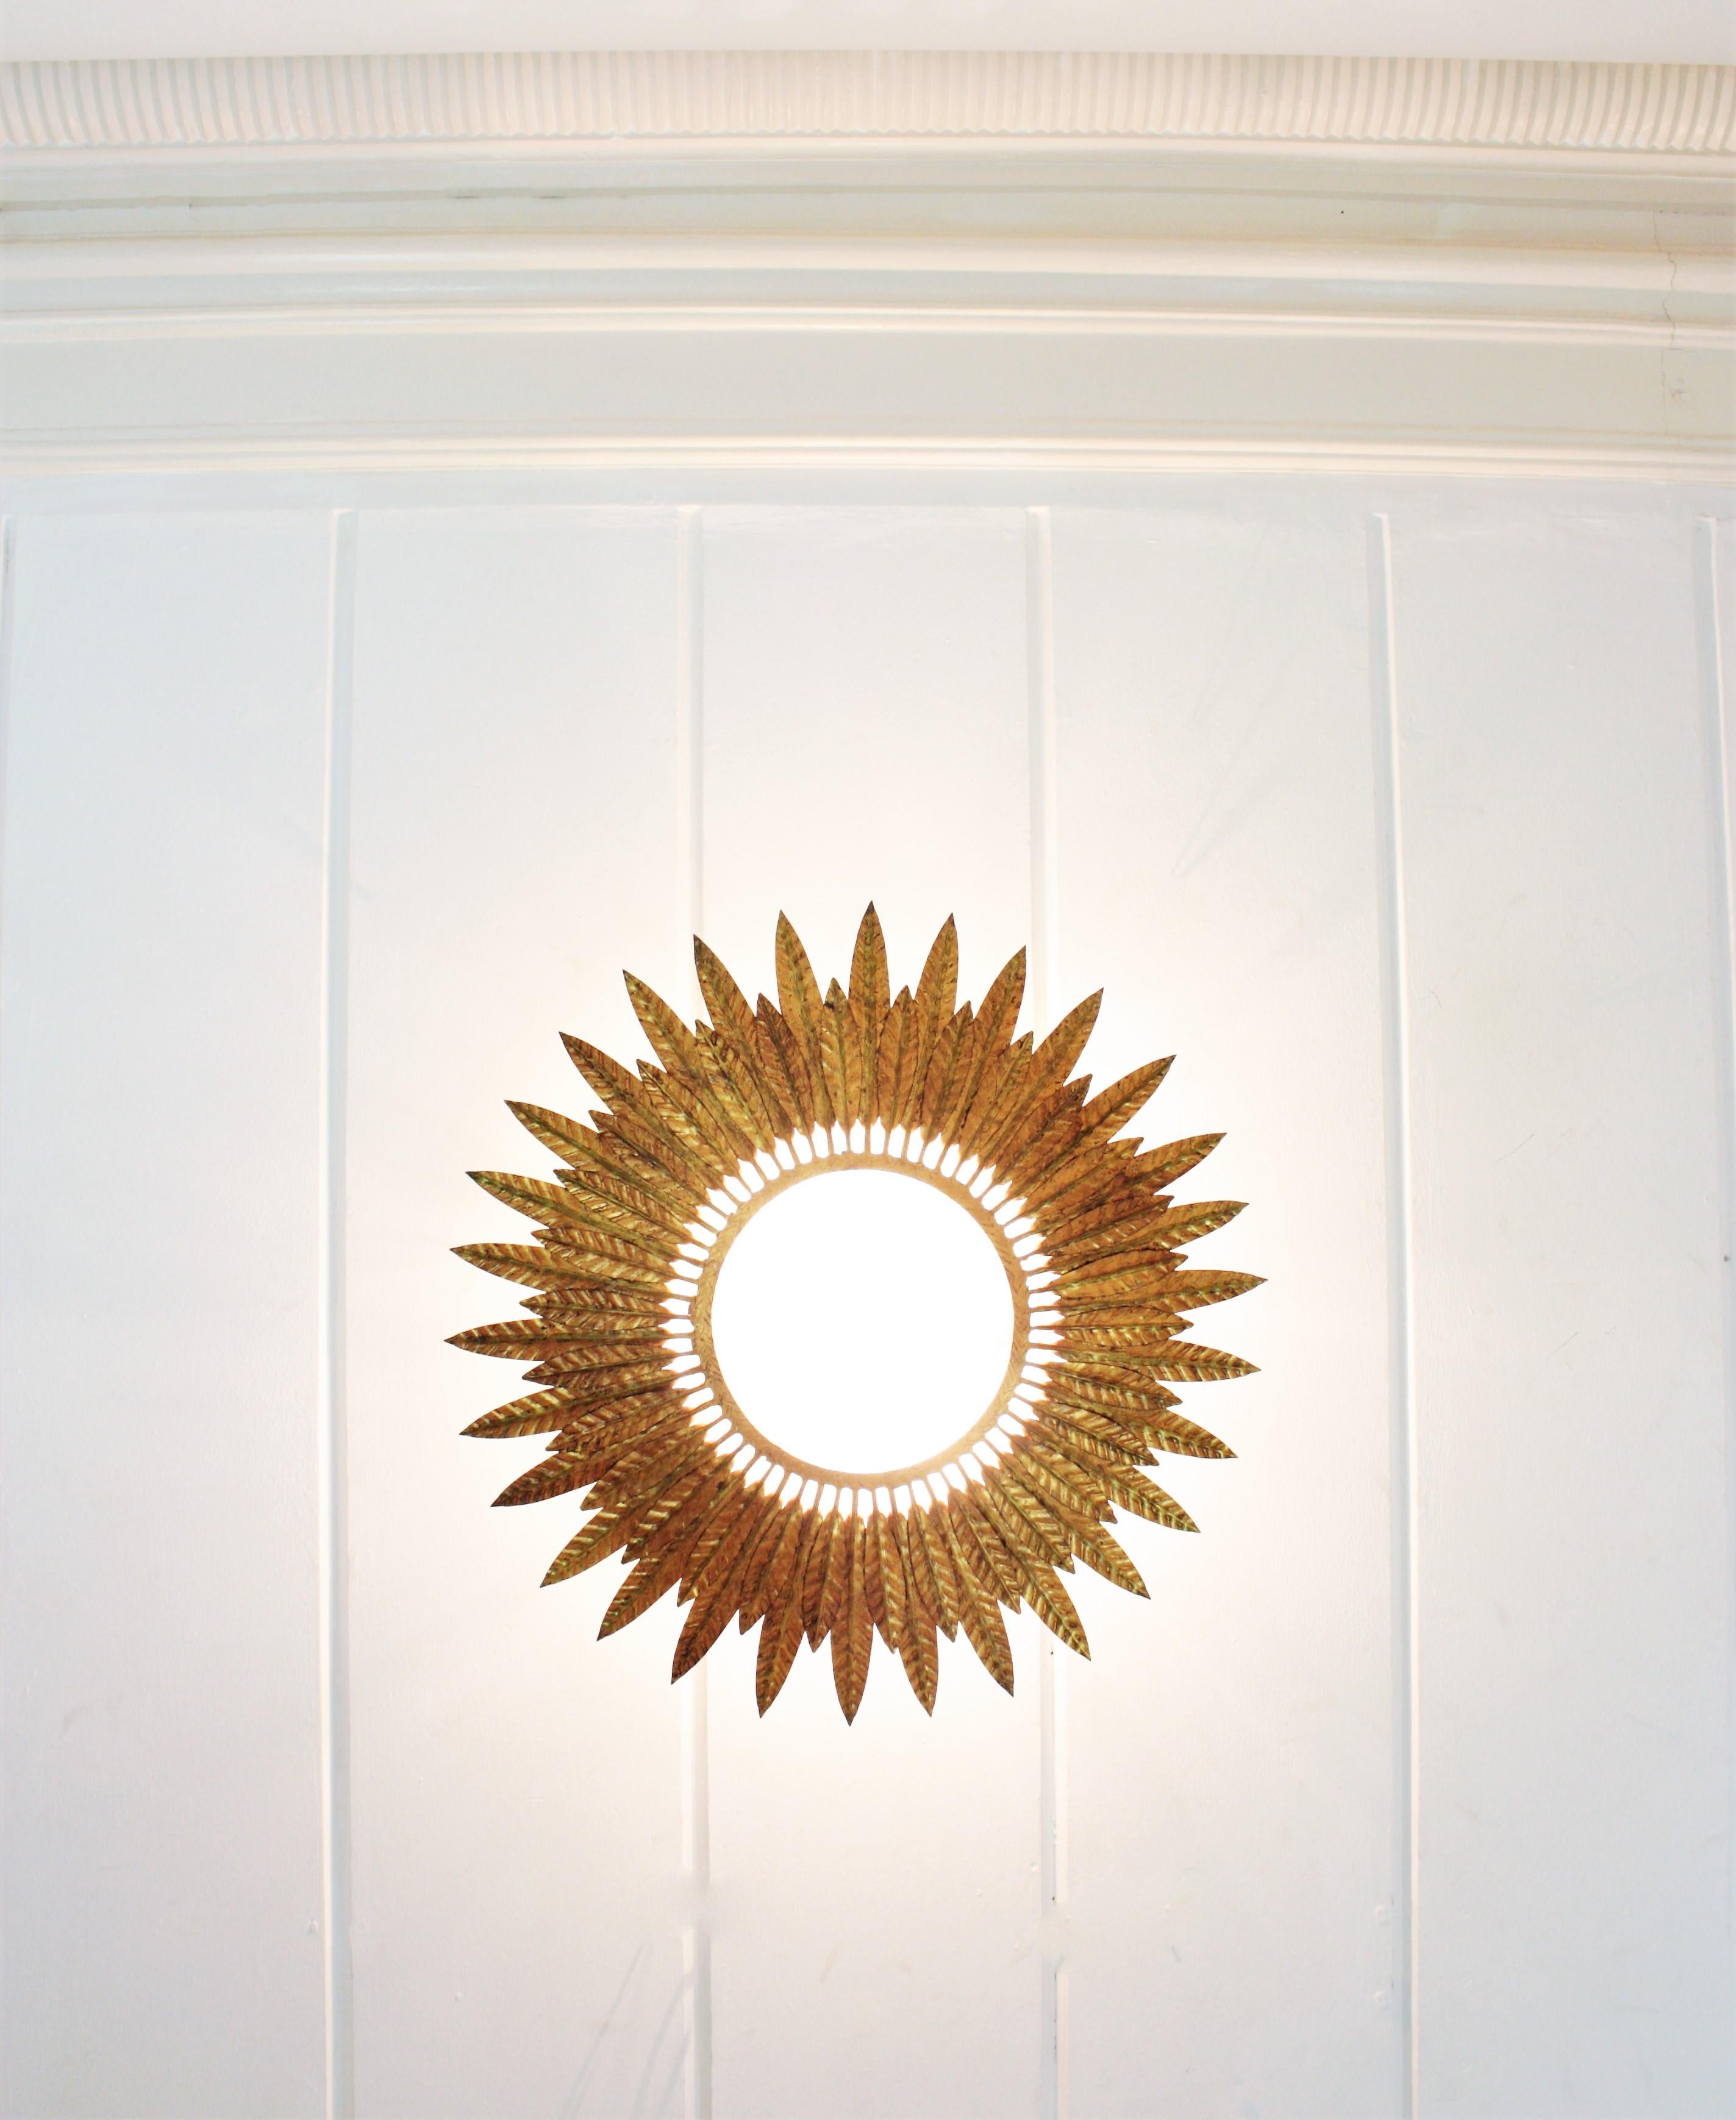 Gilt Iron Sunburst Leafed Light Fixture with Frosted Glass, Spain, 1950s For Sale 8